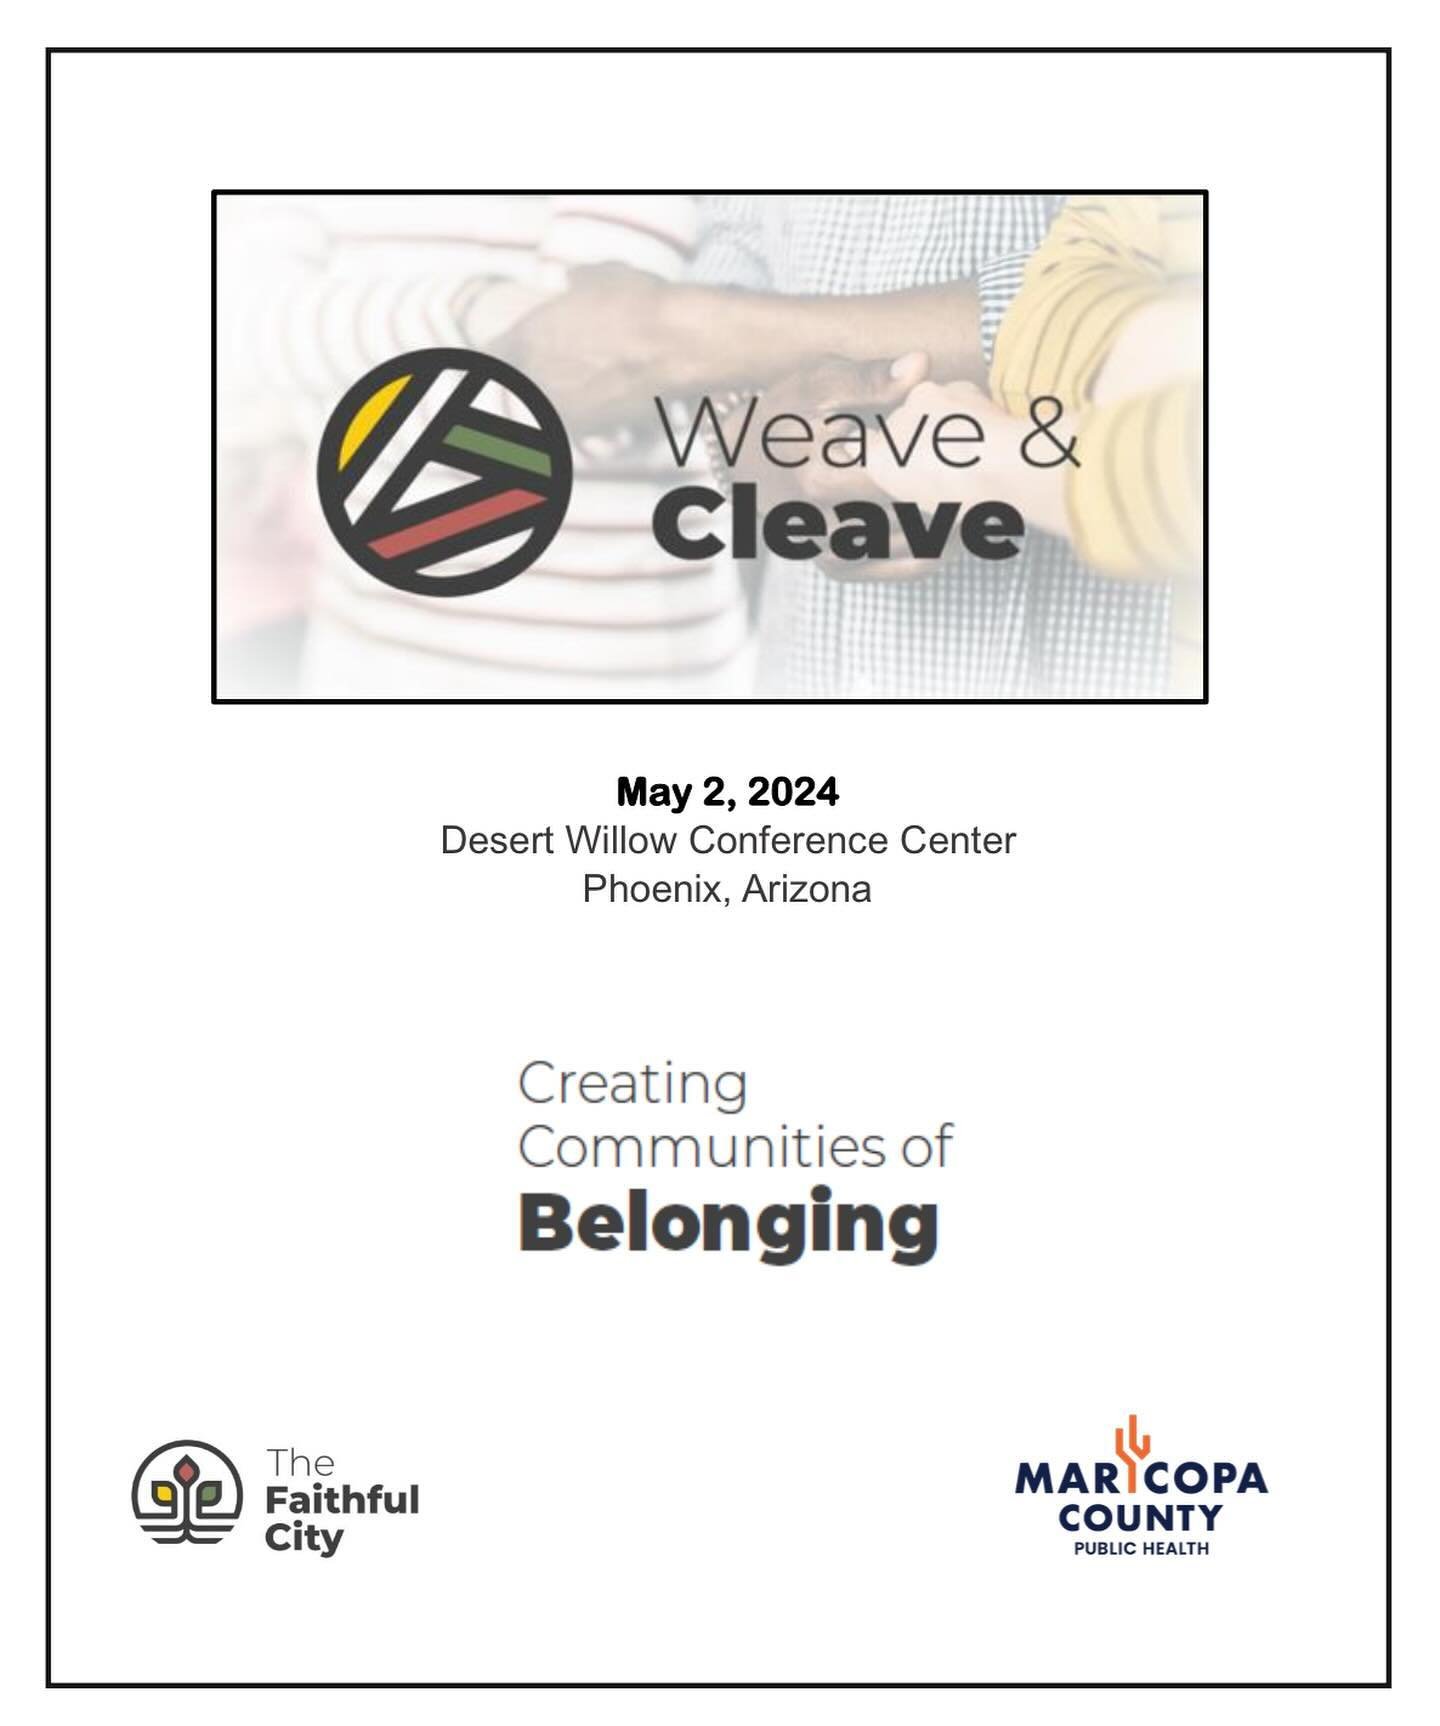 The 2nd Annual Weave and Cleave Conference (5/02/24) registration: 
https://2ndweaveandcleave.eventbrite.com